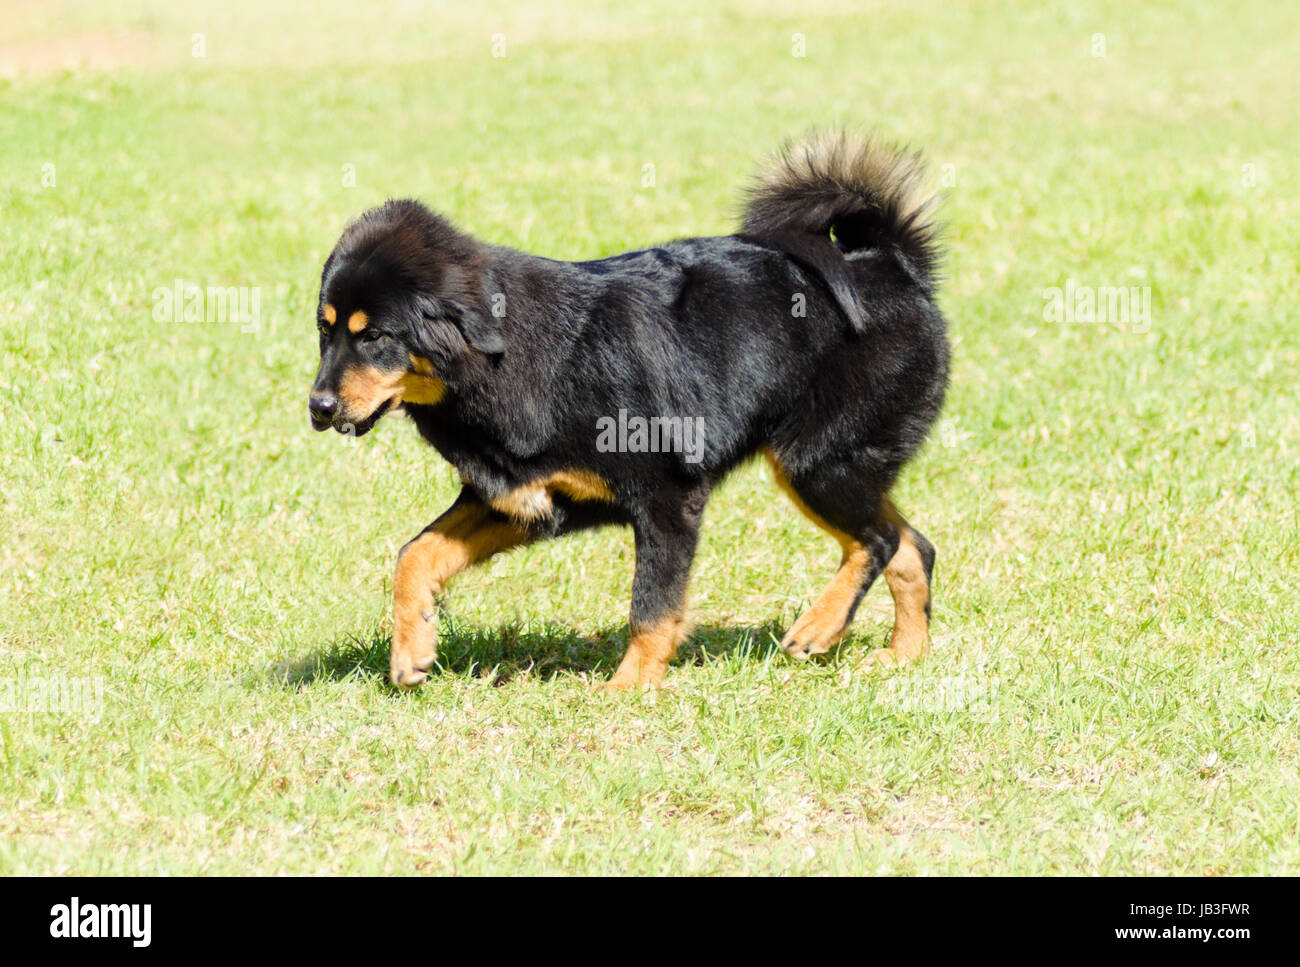 A young, beautiful, black and tan - gold Tibetan Mastiff puppy dog walking on the grass. Do Khyi dogs are known for being courageous, thoughtful and calm. Stock Photo